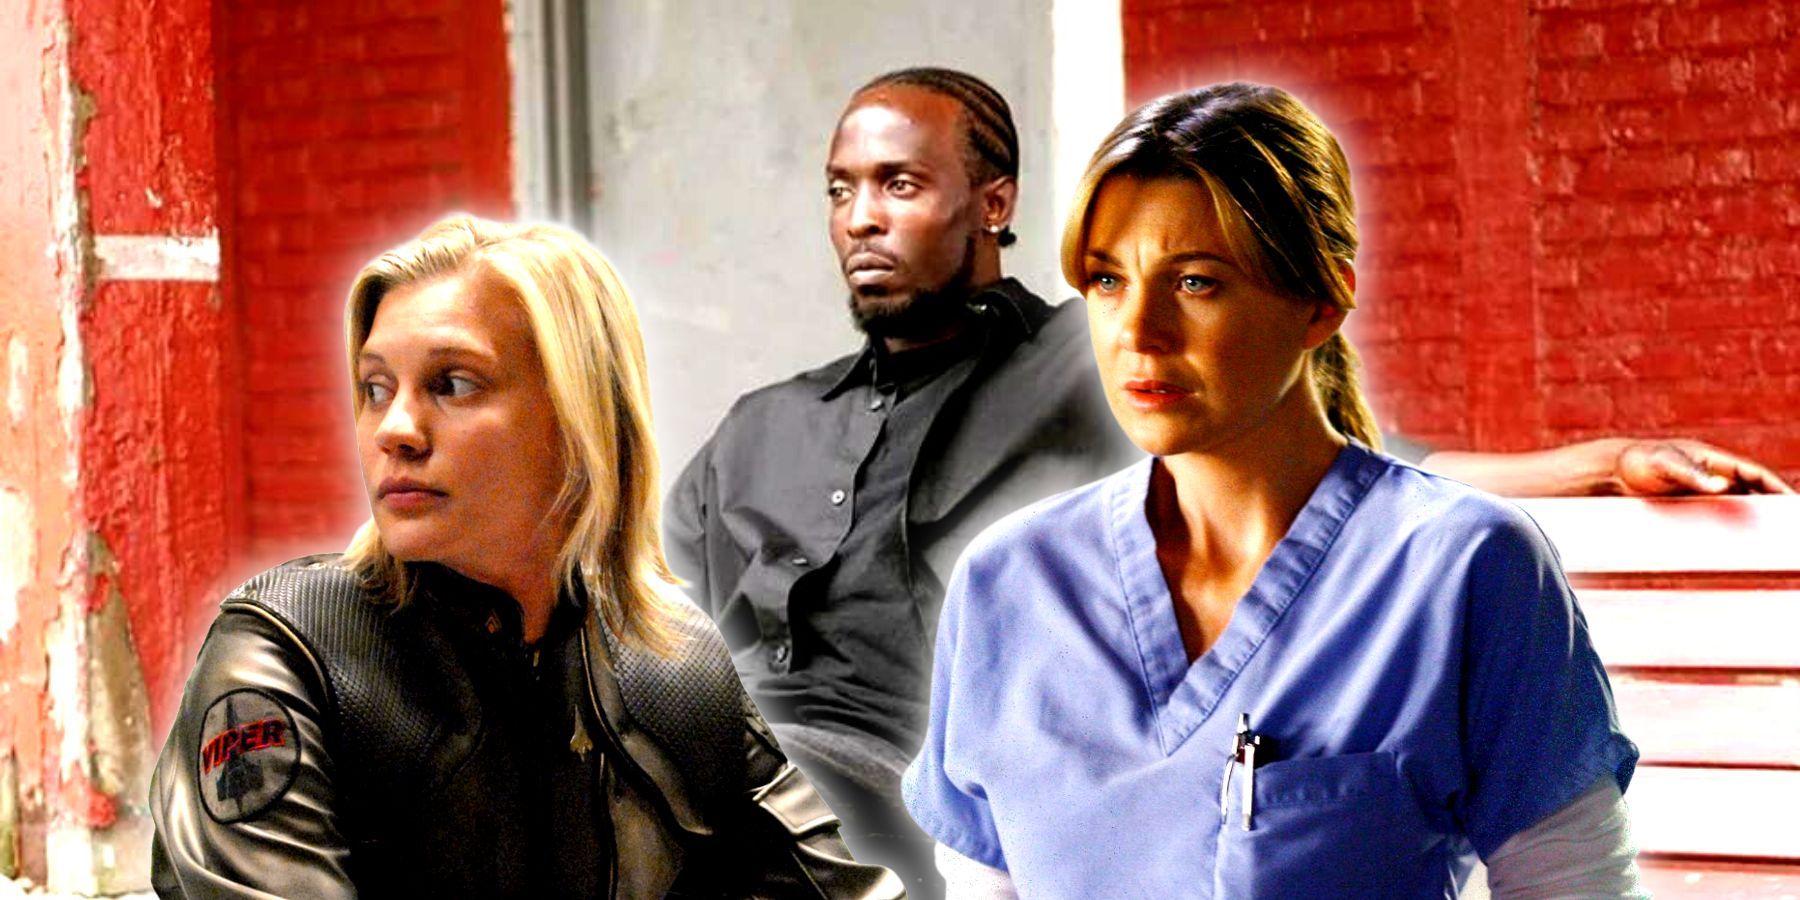 Starbuck, Omar Little, and Meredith Grey from Battlestar Galactica, The Wire, and Grey's Anatomy